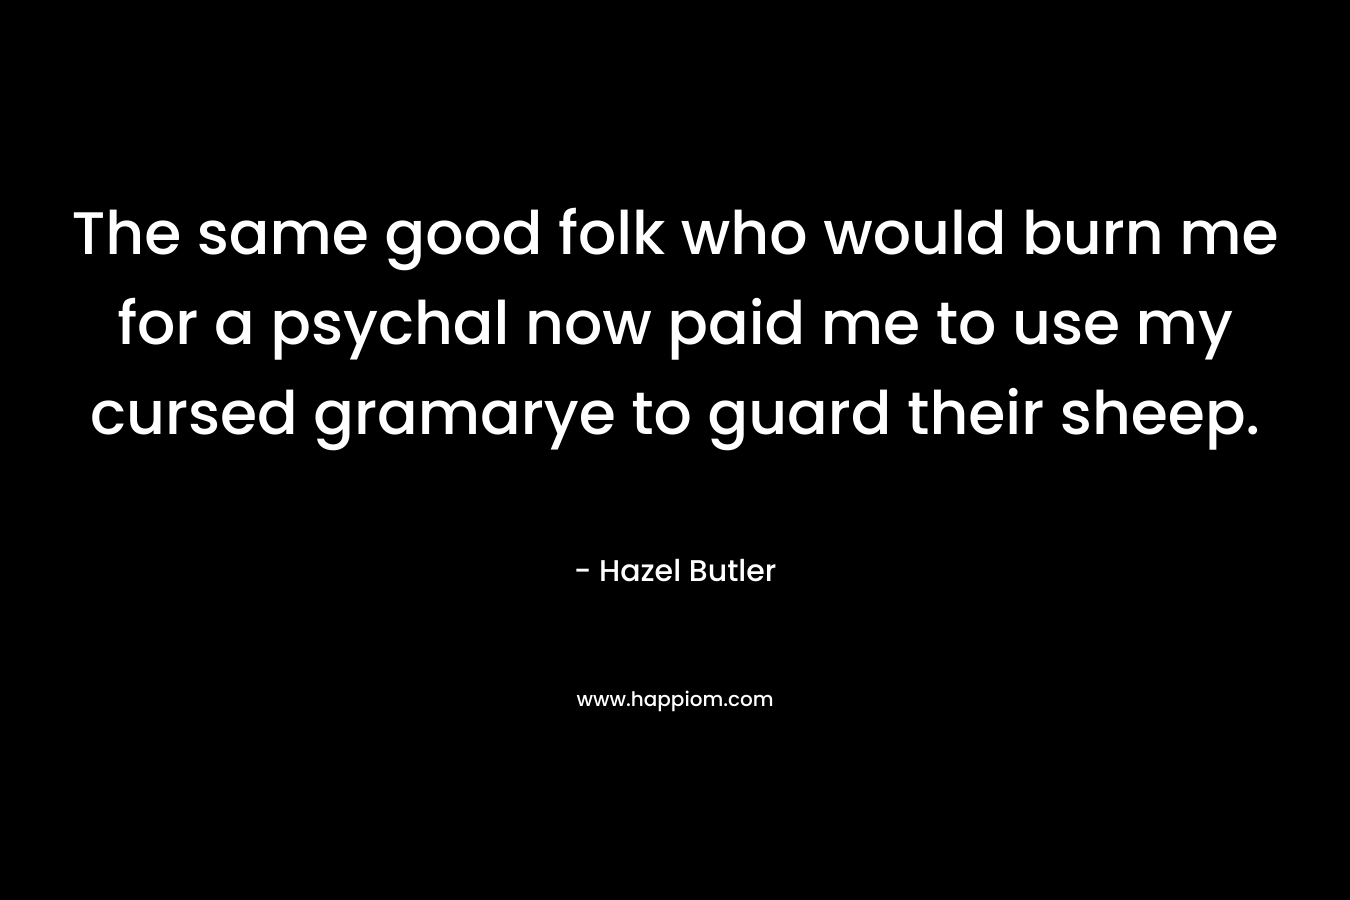 The same good folk who would burn me for a psychal now paid me to use my cursed gramarye to guard their sheep. – Hazel Butler